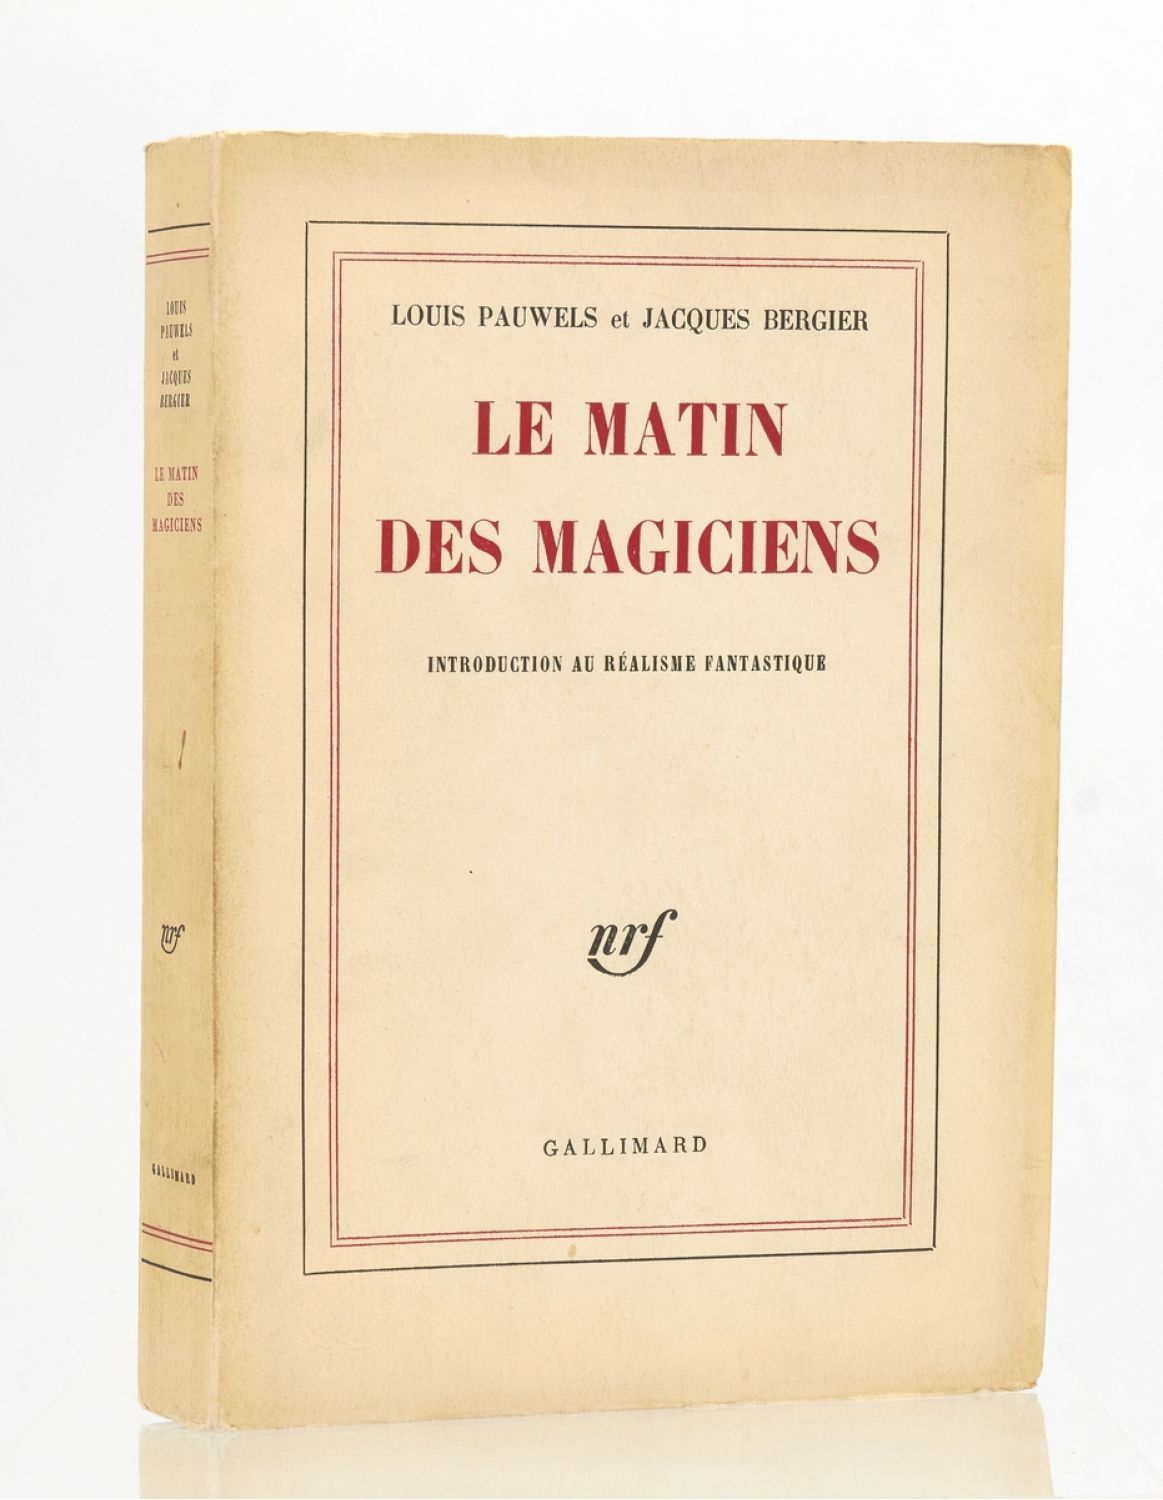 PAUWELS : Le matin des magiciens - Signed book, First edition 